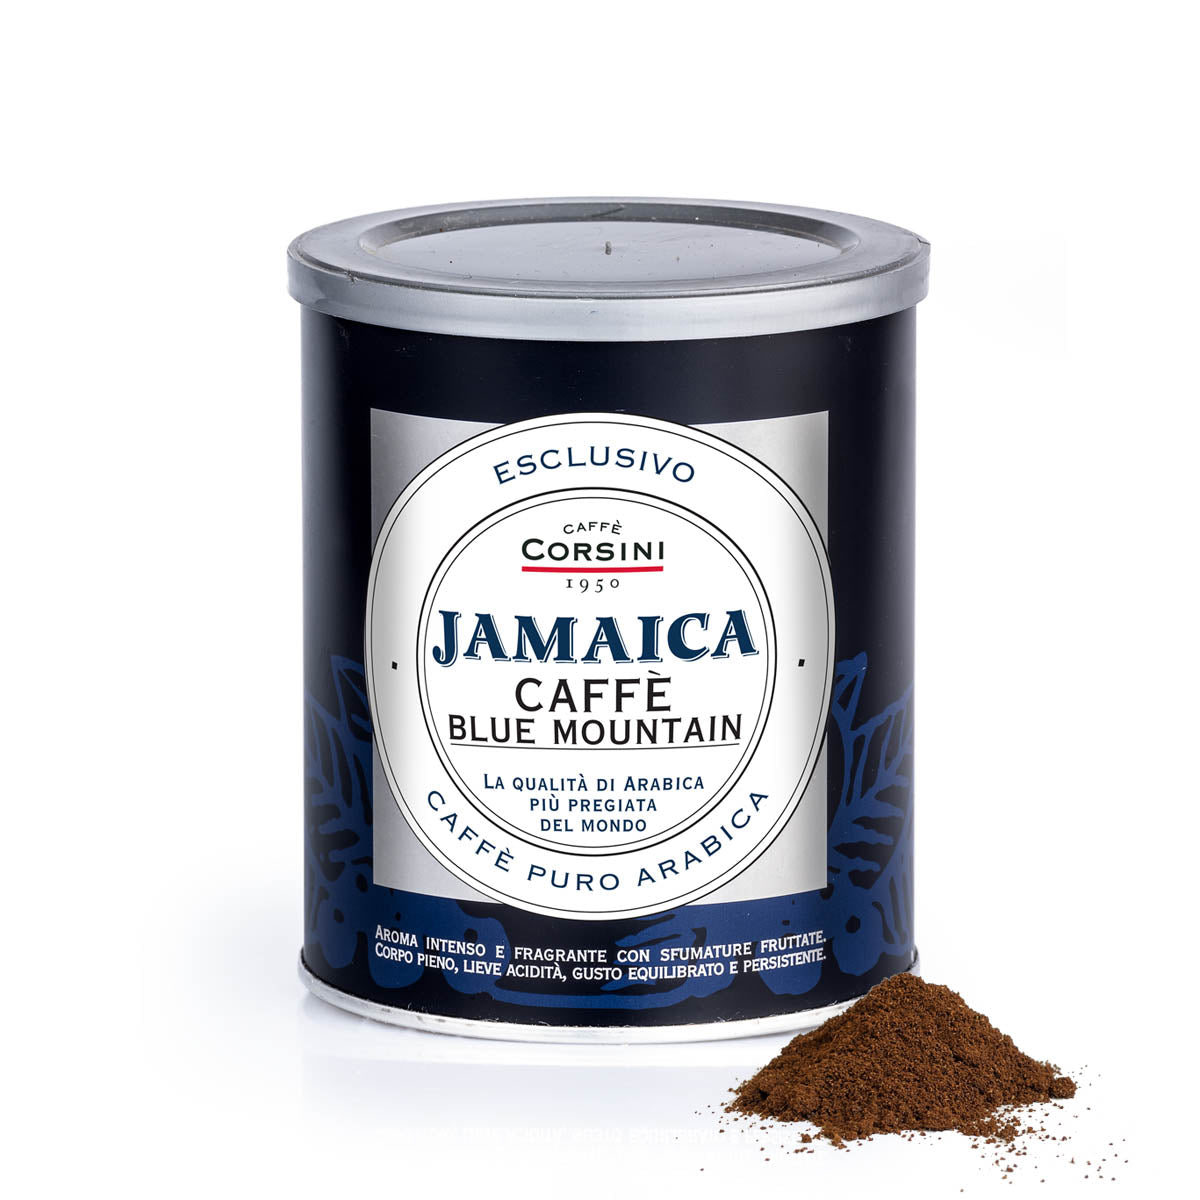 Ground coffee | Jamaica Blue Mountain | 100% Arabica | Can of 250g | Box of 6 cans